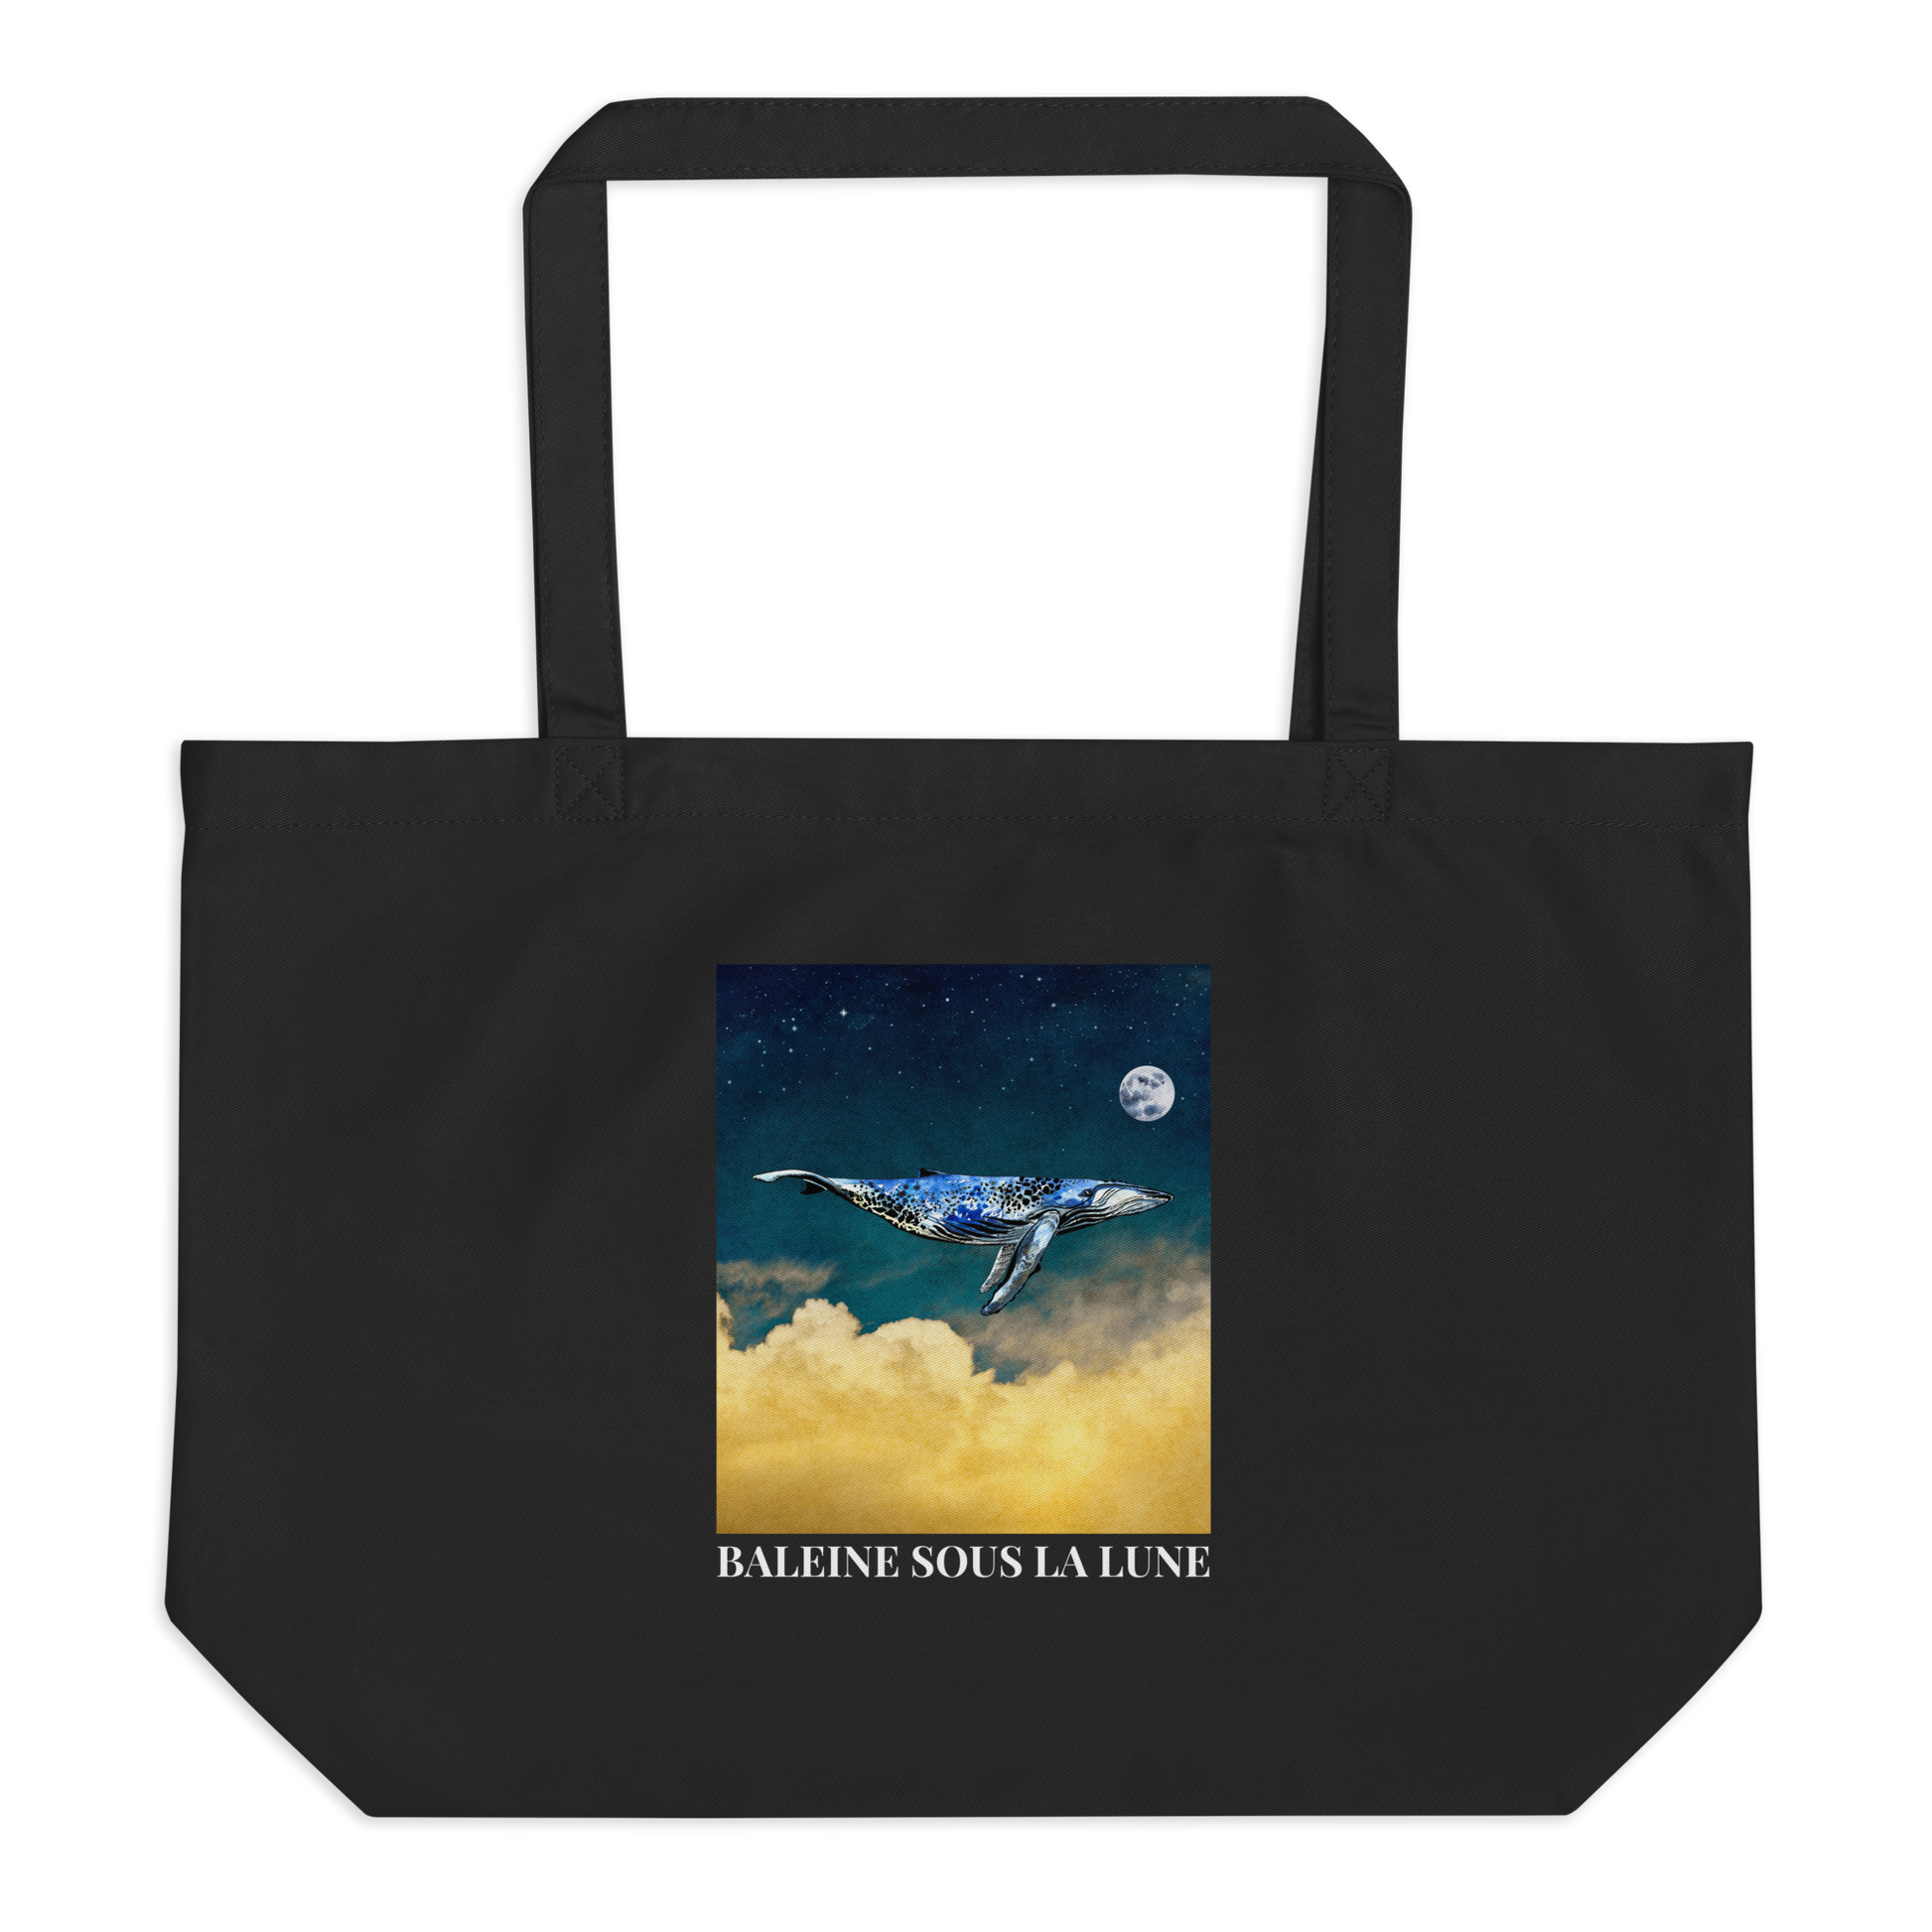 Black Whale Eco Tote Bag featuring a majestic Whale Under The Moon graphic - Shop Large Organic Cotton Tote Bags Online - Boozy Fox